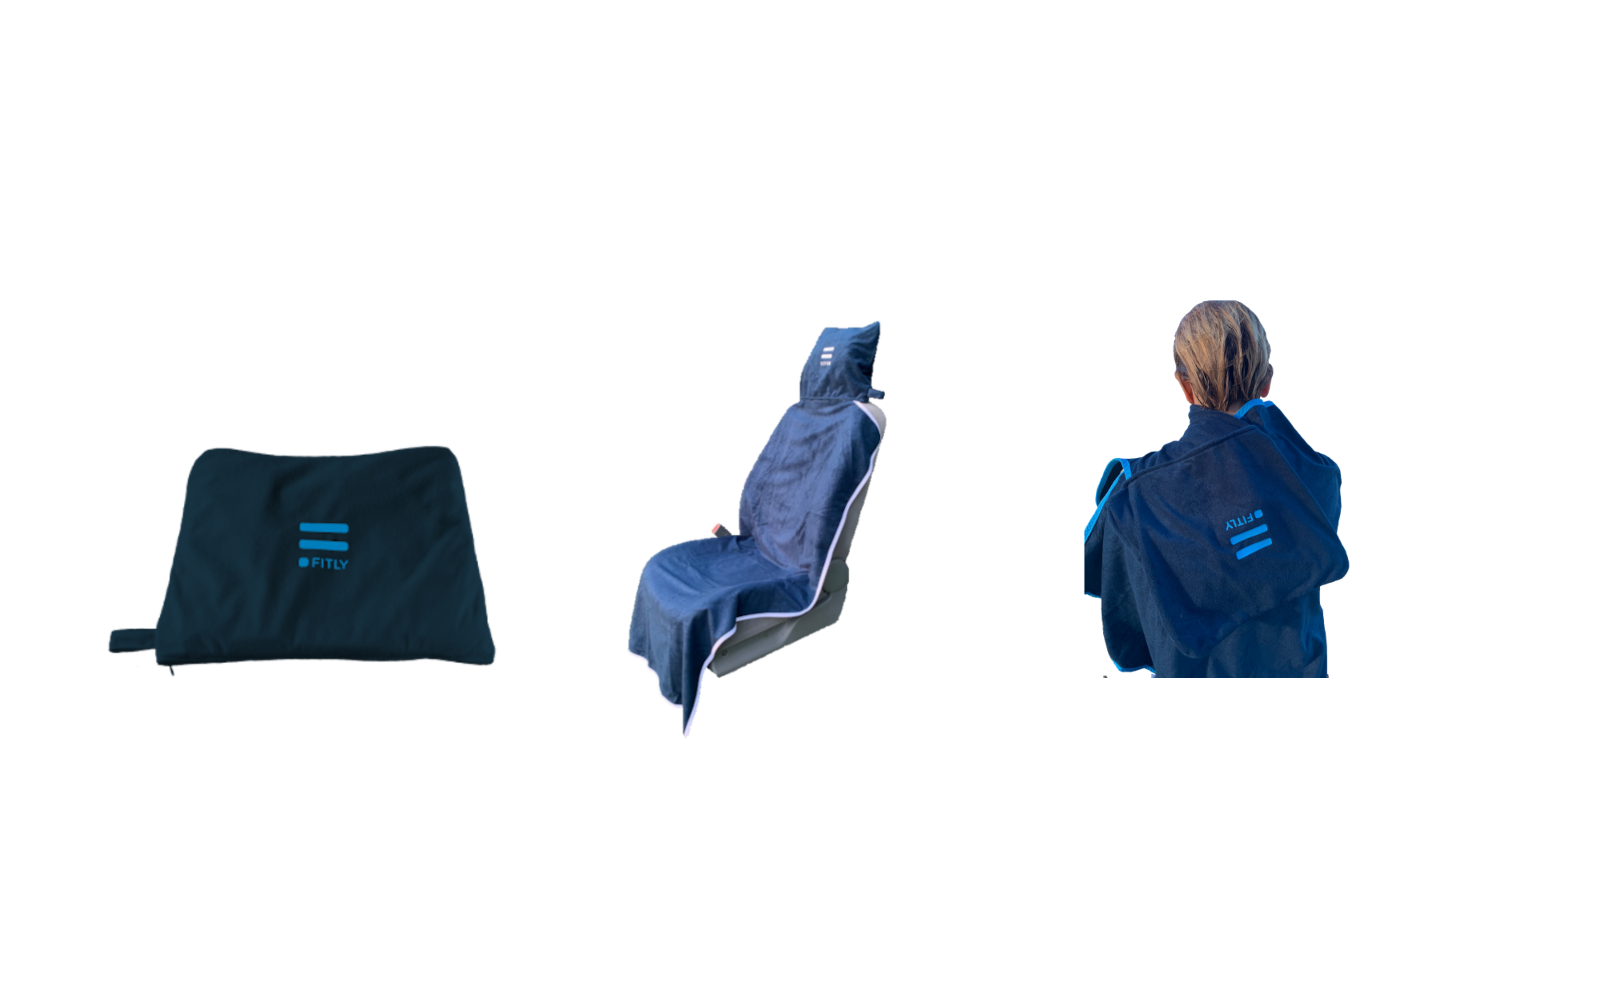 Innovative Seat Covers